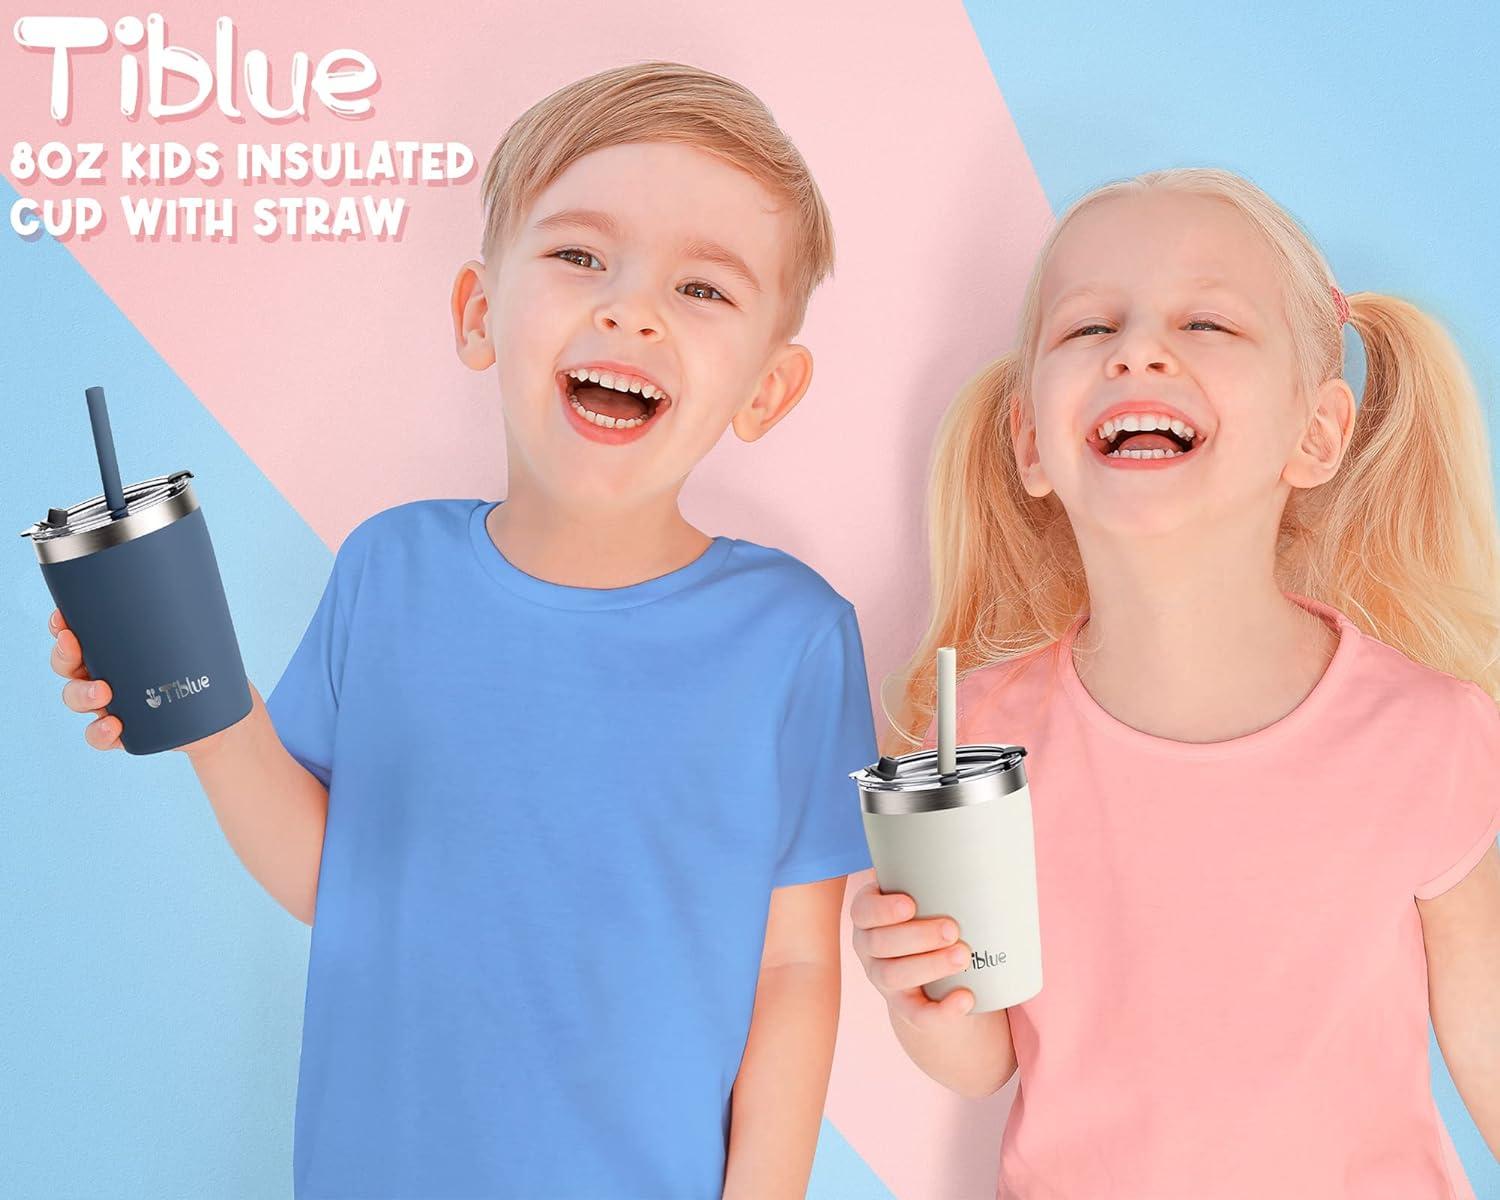 Tiblue Kids & Toddler Cup - 4 Pack 8oz Spill Proof Stainless Steel Water  Bottle Insulated Tumbler with Leak Proof Lid & Silicone Straw with Stopper  - BPA FREE Baby Smoothie Drinking